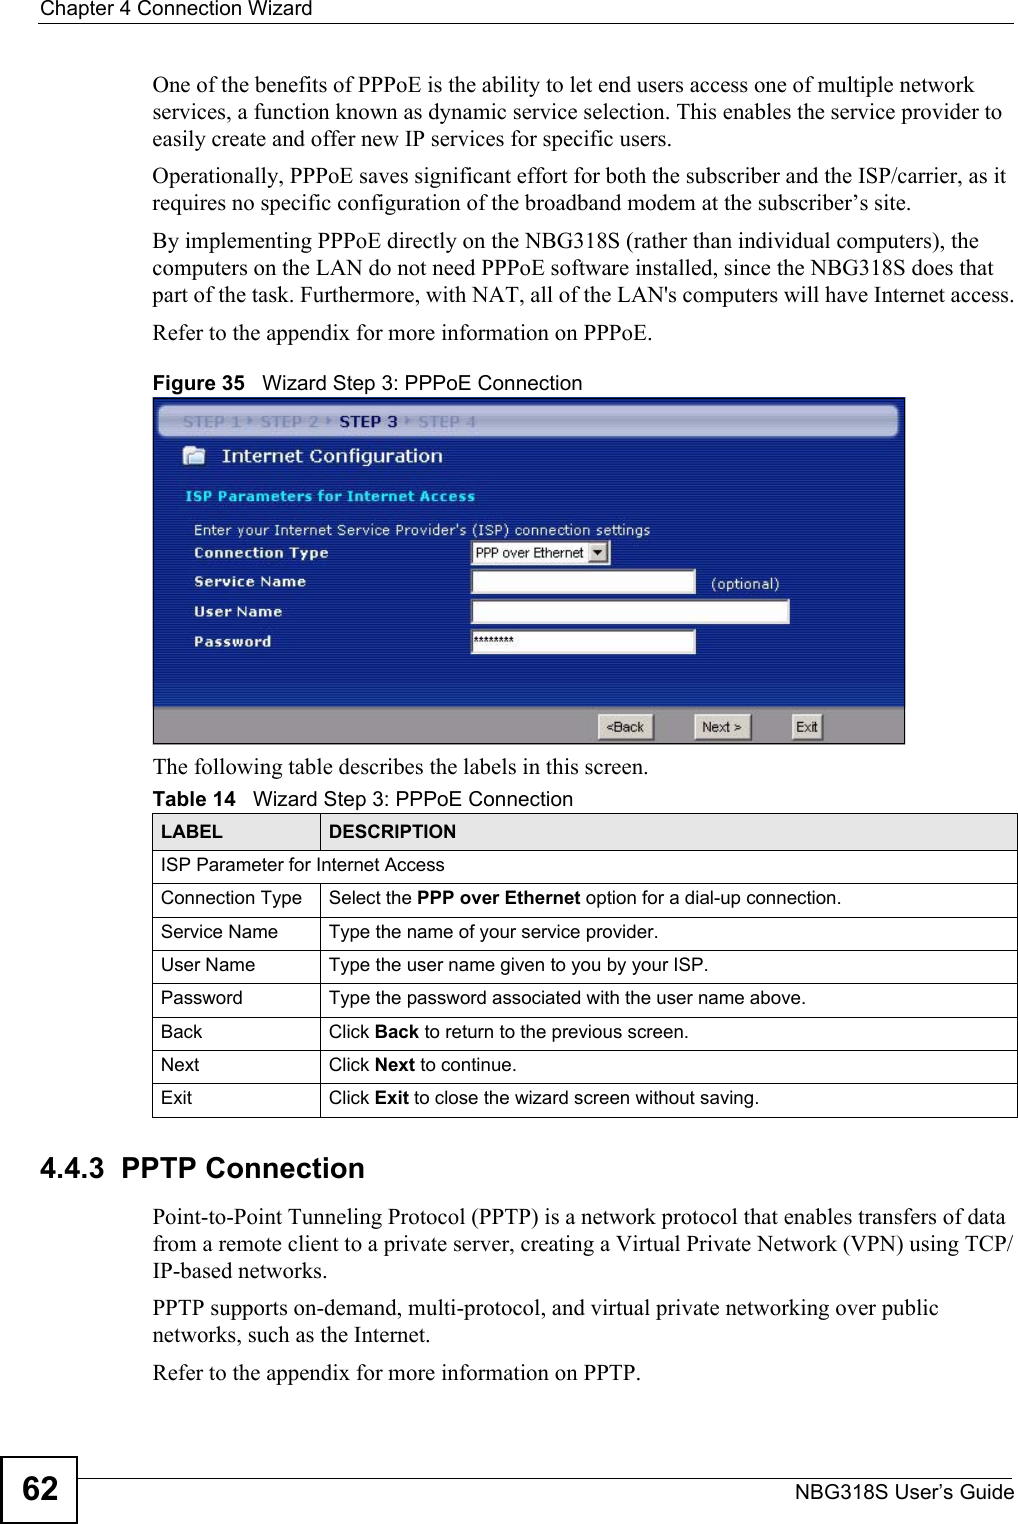 Chapter 4 Connection WizardNBG318S User’s Guide62One of the benefits of PPPoE is the ability to let end users access one of multiple network services, a function known as dynamic service selection. This enables the service provider to easily create and offer new IP services for specific users.Operationally, PPPoE saves significant effort for both the subscriber and the ISP/carrier, as it requires no specific configuration of the broadband modem at the subscriber’s site.By implementing PPPoE directly on the NBG318S (rather than individual computers), the computers on the LAN do not need PPPoE software installed, since the NBG318S does that part of the task. Furthermore, with NAT, all of the LAN&apos;s computers will have Internet access.Refer to the appendix for more information on PPPoE.Figure 35   Wizard Step 3: PPPoE ConnectionThe following table describes the labels in this screen.4.4.3  PPTP ConnectionPoint-to-Point Tunneling Protocol (PPTP) is a network protocol that enables transfers of data from a remote client to a private server, creating a Virtual Private Network (VPN) using TCP/IP-based networks.PPTP supports on-demand, multi-protocol, and virtual private networking over public networks, such as the Internet.Refer to the appendix for more information on PPTP.Table 14   Wizard Step 3: PPPoE ConnectionLABEL DESCRIPTIONISP Parameter for Internet AccessConnection Type Select the PPP over Ethernet option for a dial-up connection.Service Name  Type the name of your service provider.User Name Type the user name given to you by your ISP. Password  Type the password associated with the user name above.Back Click Back to return to the previous screen. Next Click Next to continue. Exit Click Exit to close the wizard screen without saving.